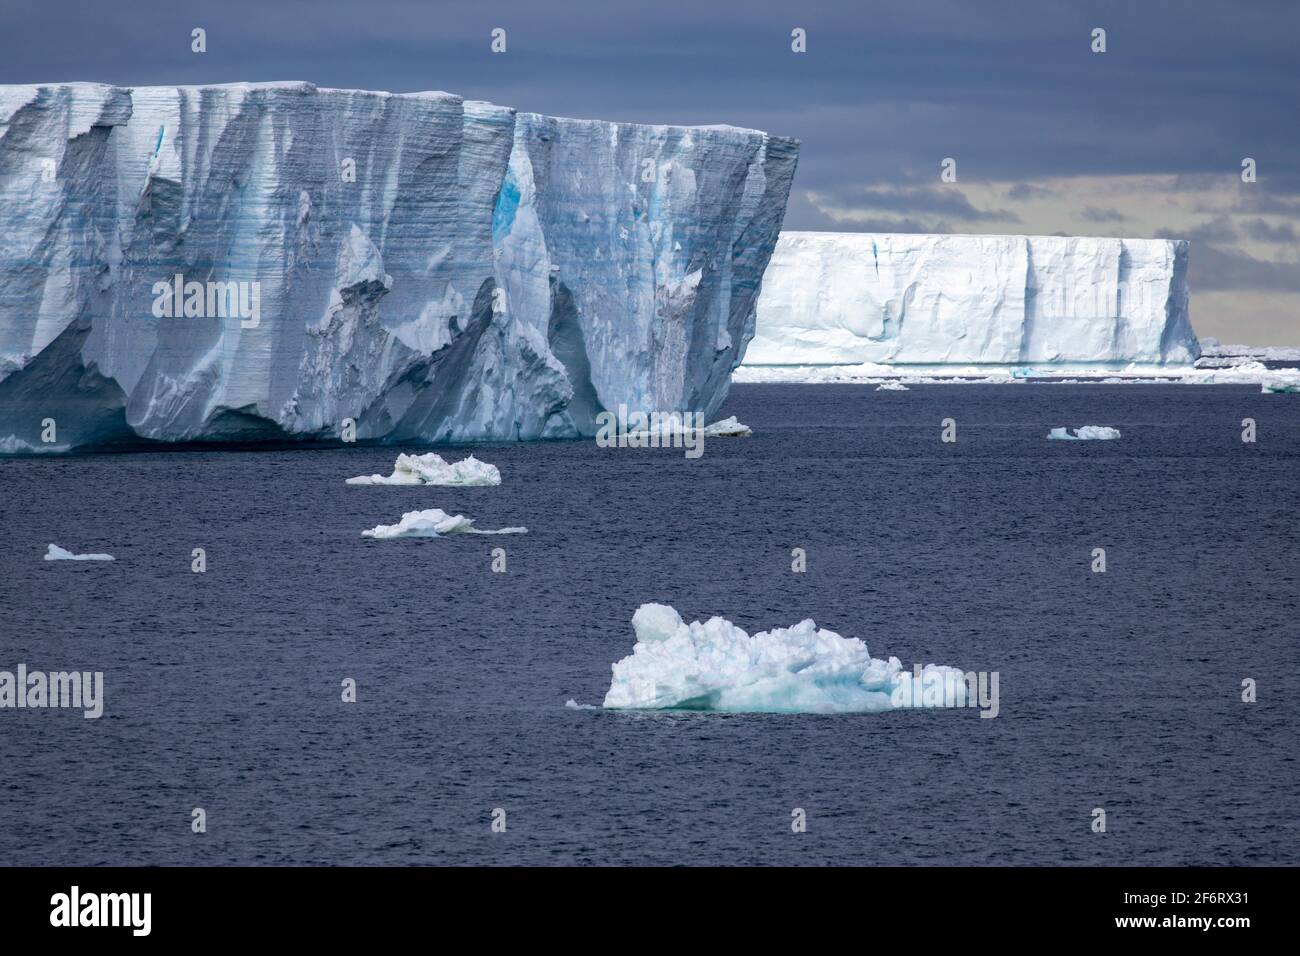 Huge icebergs floating in cold sea in Antarctica. Stock Photo